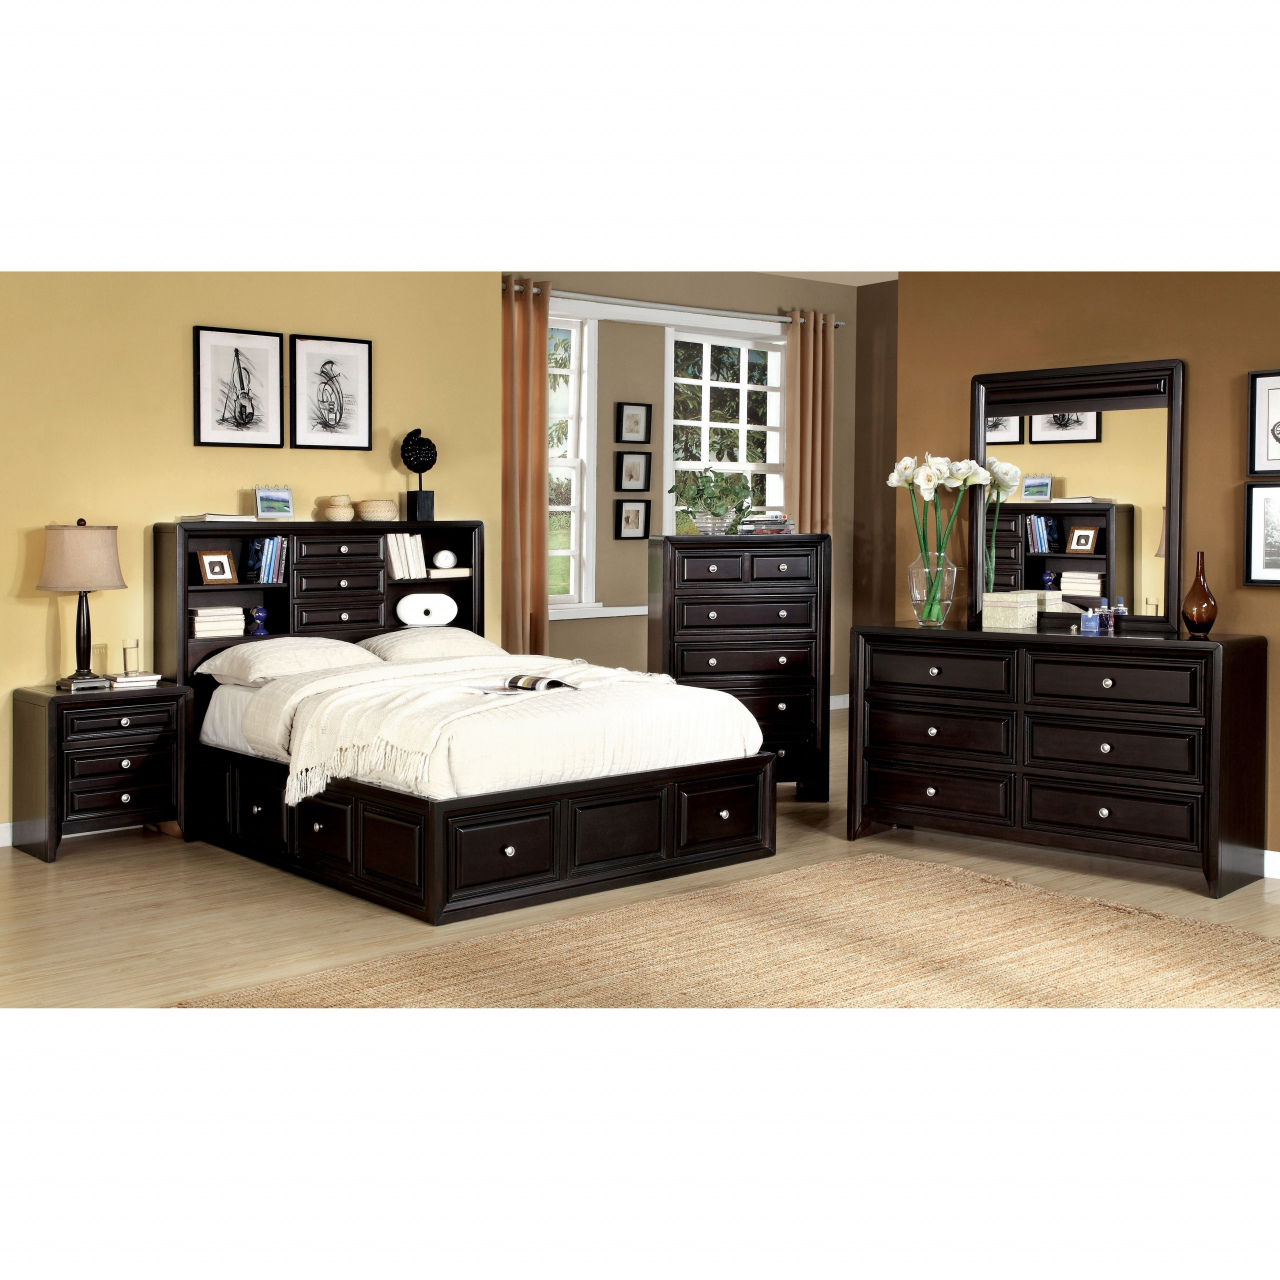 Espresso Electric Fireplace Lovely Queen Size Bedroom Sets with Electric Fireplace Better Homes